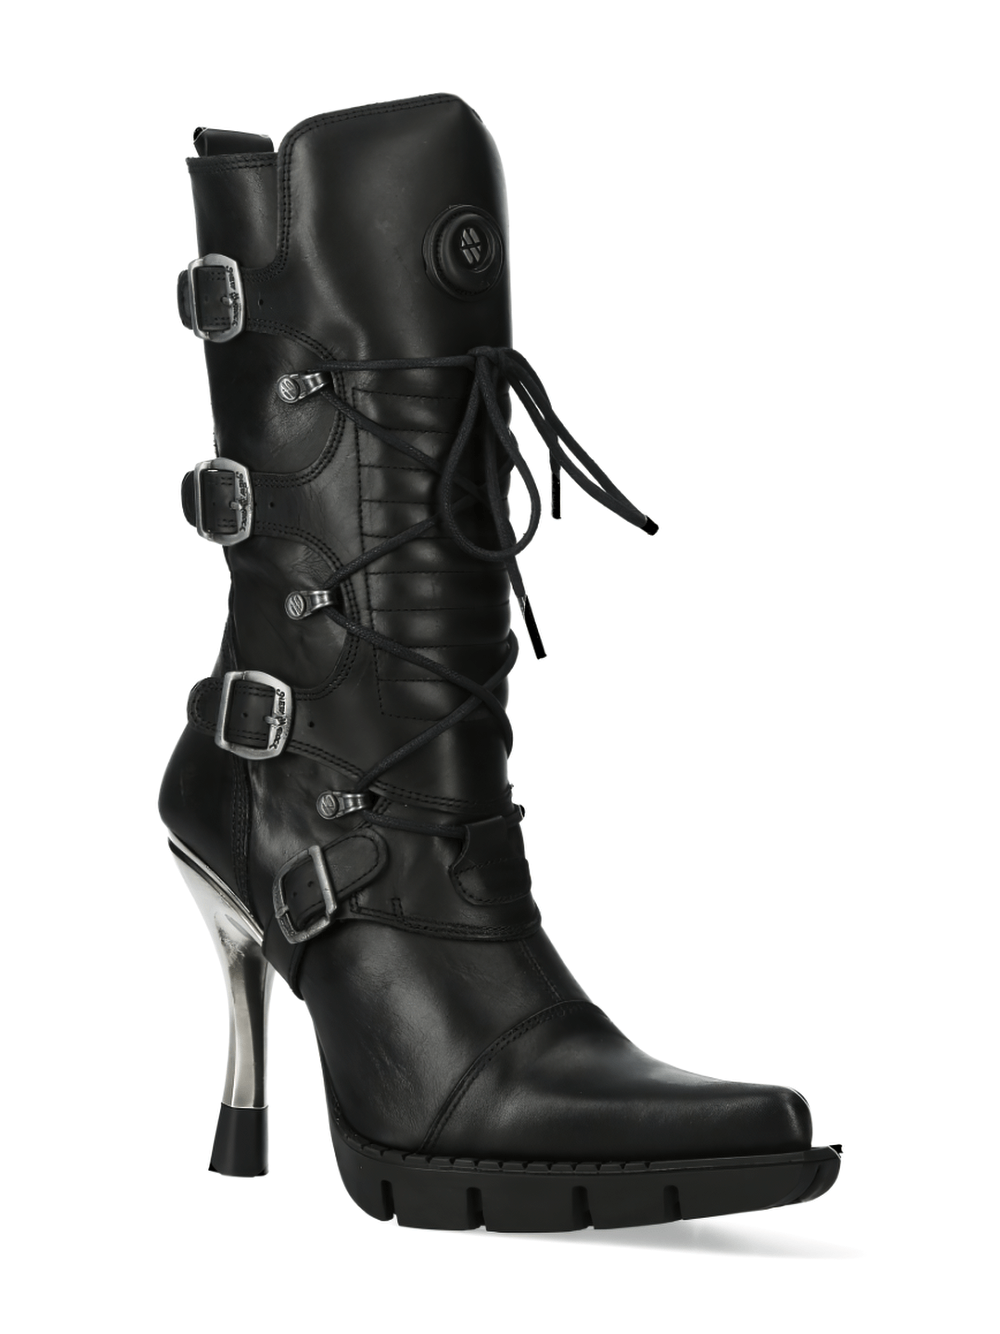 NEW ROCK Urban Black Lace-Up Heeled Boots With Buckles